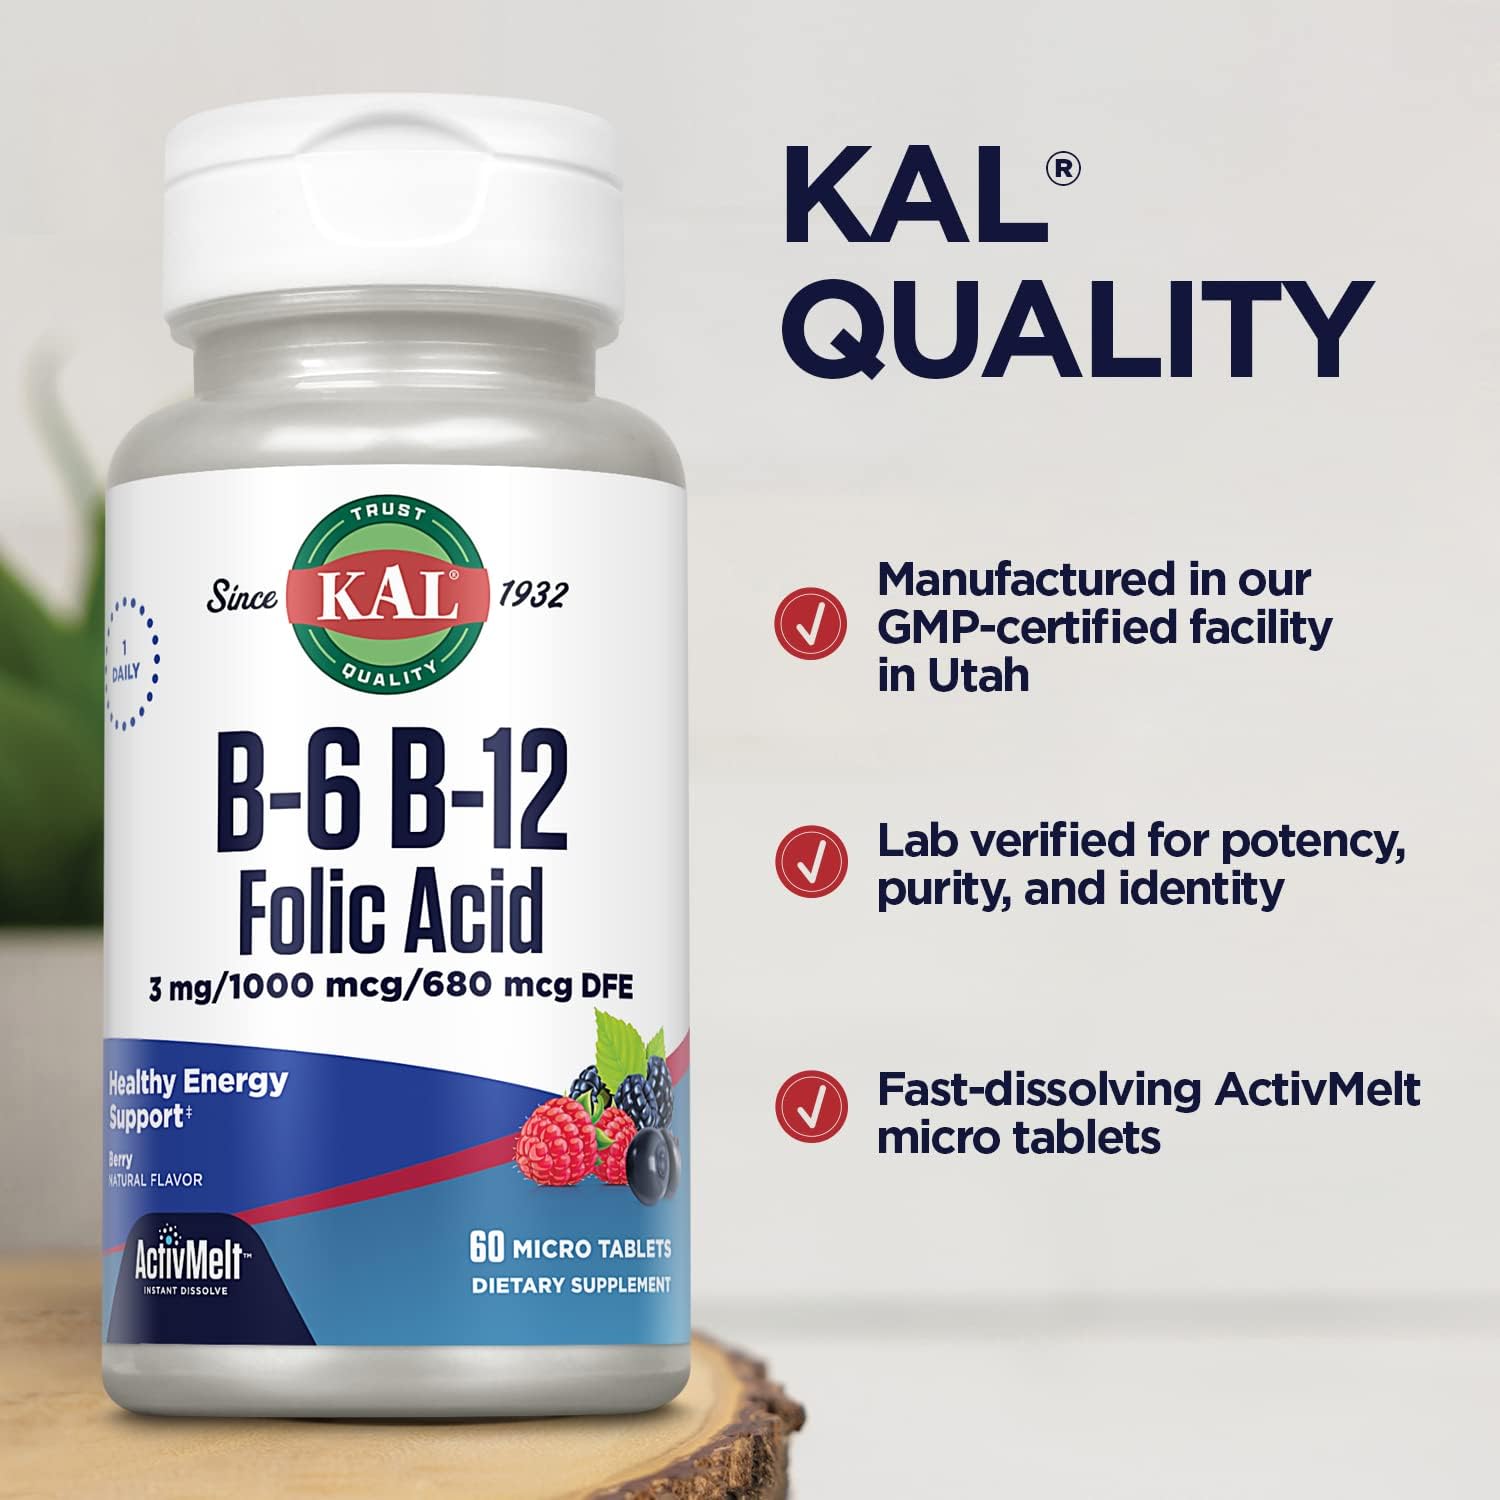 KAL Vitamin B-6, B-12 & Folic Acid Supplement, Heart Health, Energy & Red Blood Cell Support*, with Vitamin B12 Methylcobalamin & Folate, Natural Berry Flavor, 60 Servings, 60 ActivMelt Micro Tablets : Health & Household